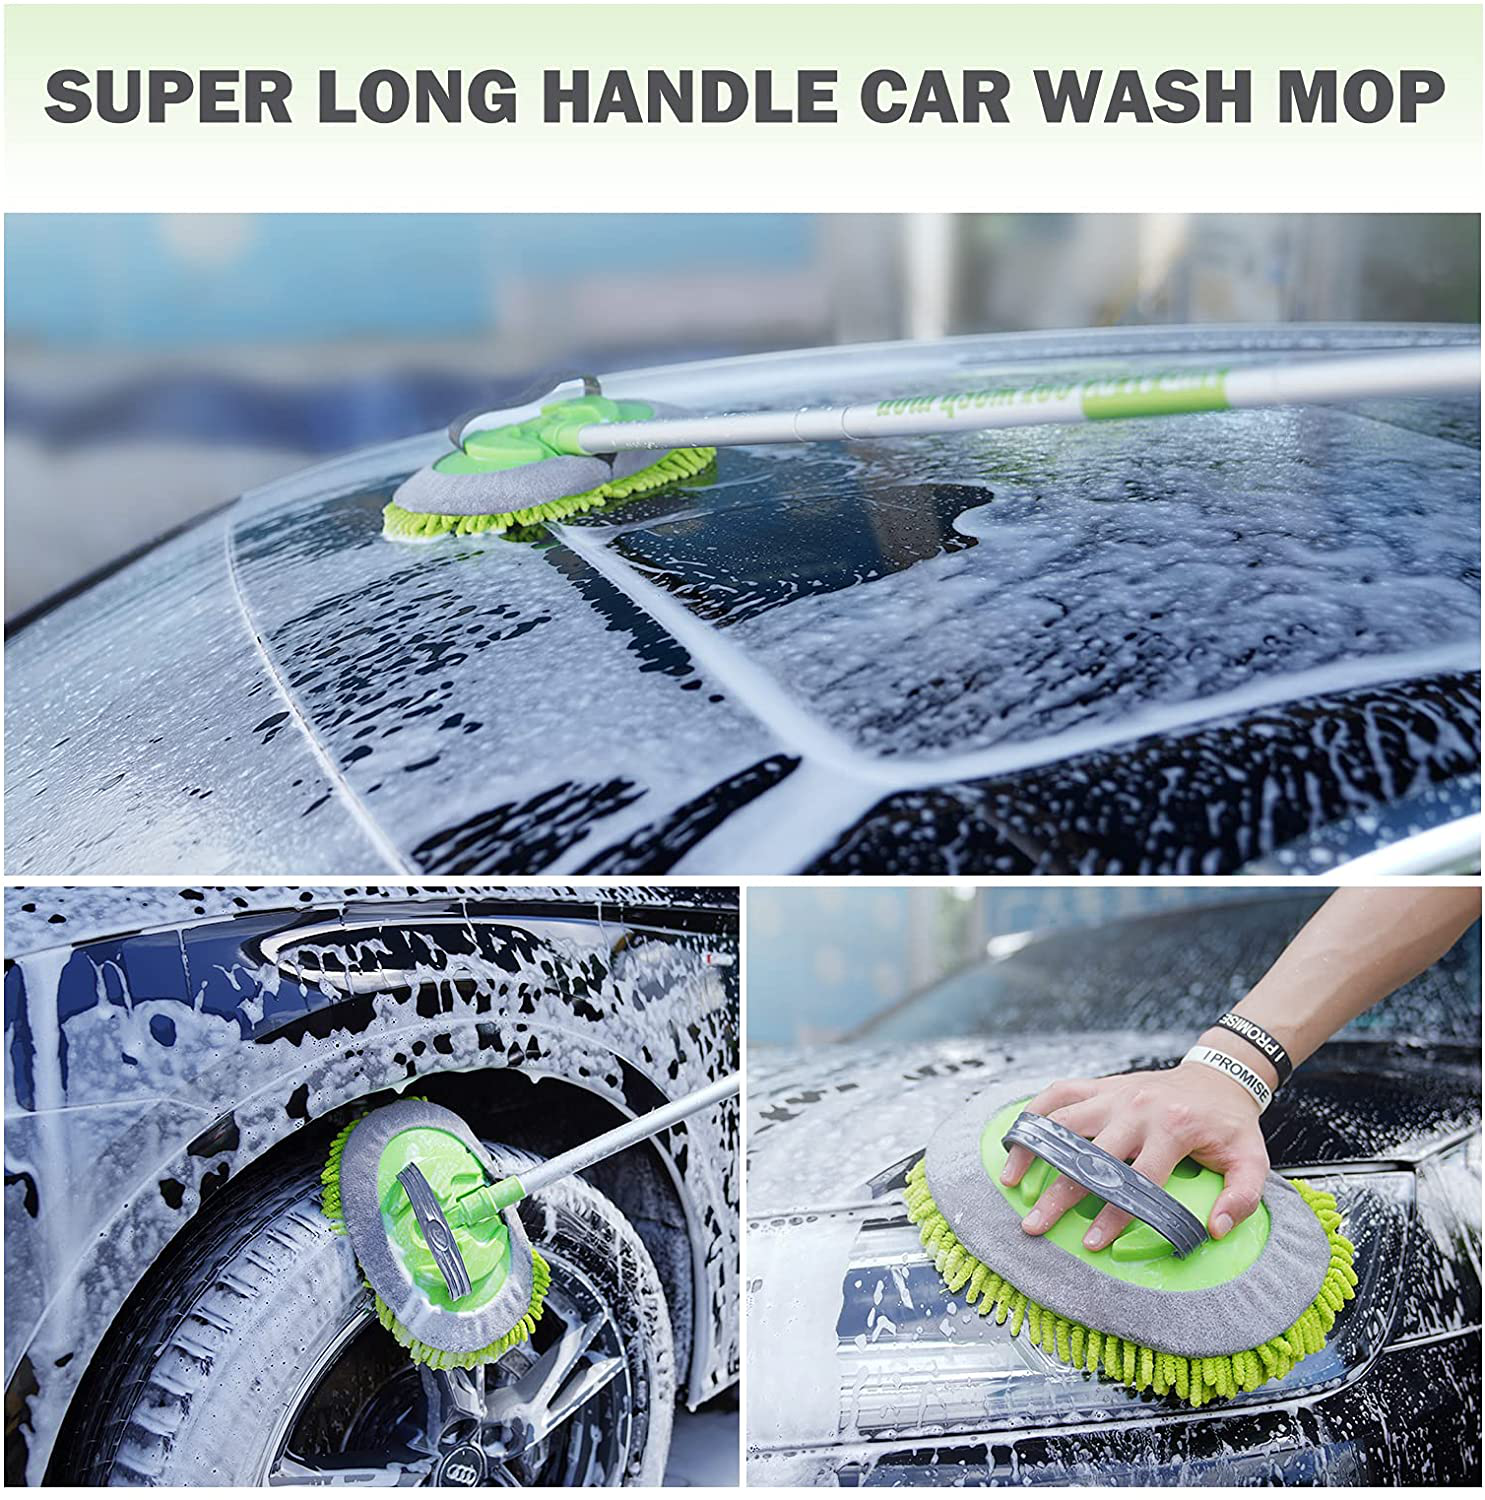 HIRALIY 2 in 1 Car Wash Brush, 62" Car Wash Mop with Long Handle, Chenille Microfiber Car Washing Mitt, Extension Pole Flexible Rotation Scratch Free, Used to Clean Trucks, RVs, Pickups, and Buses